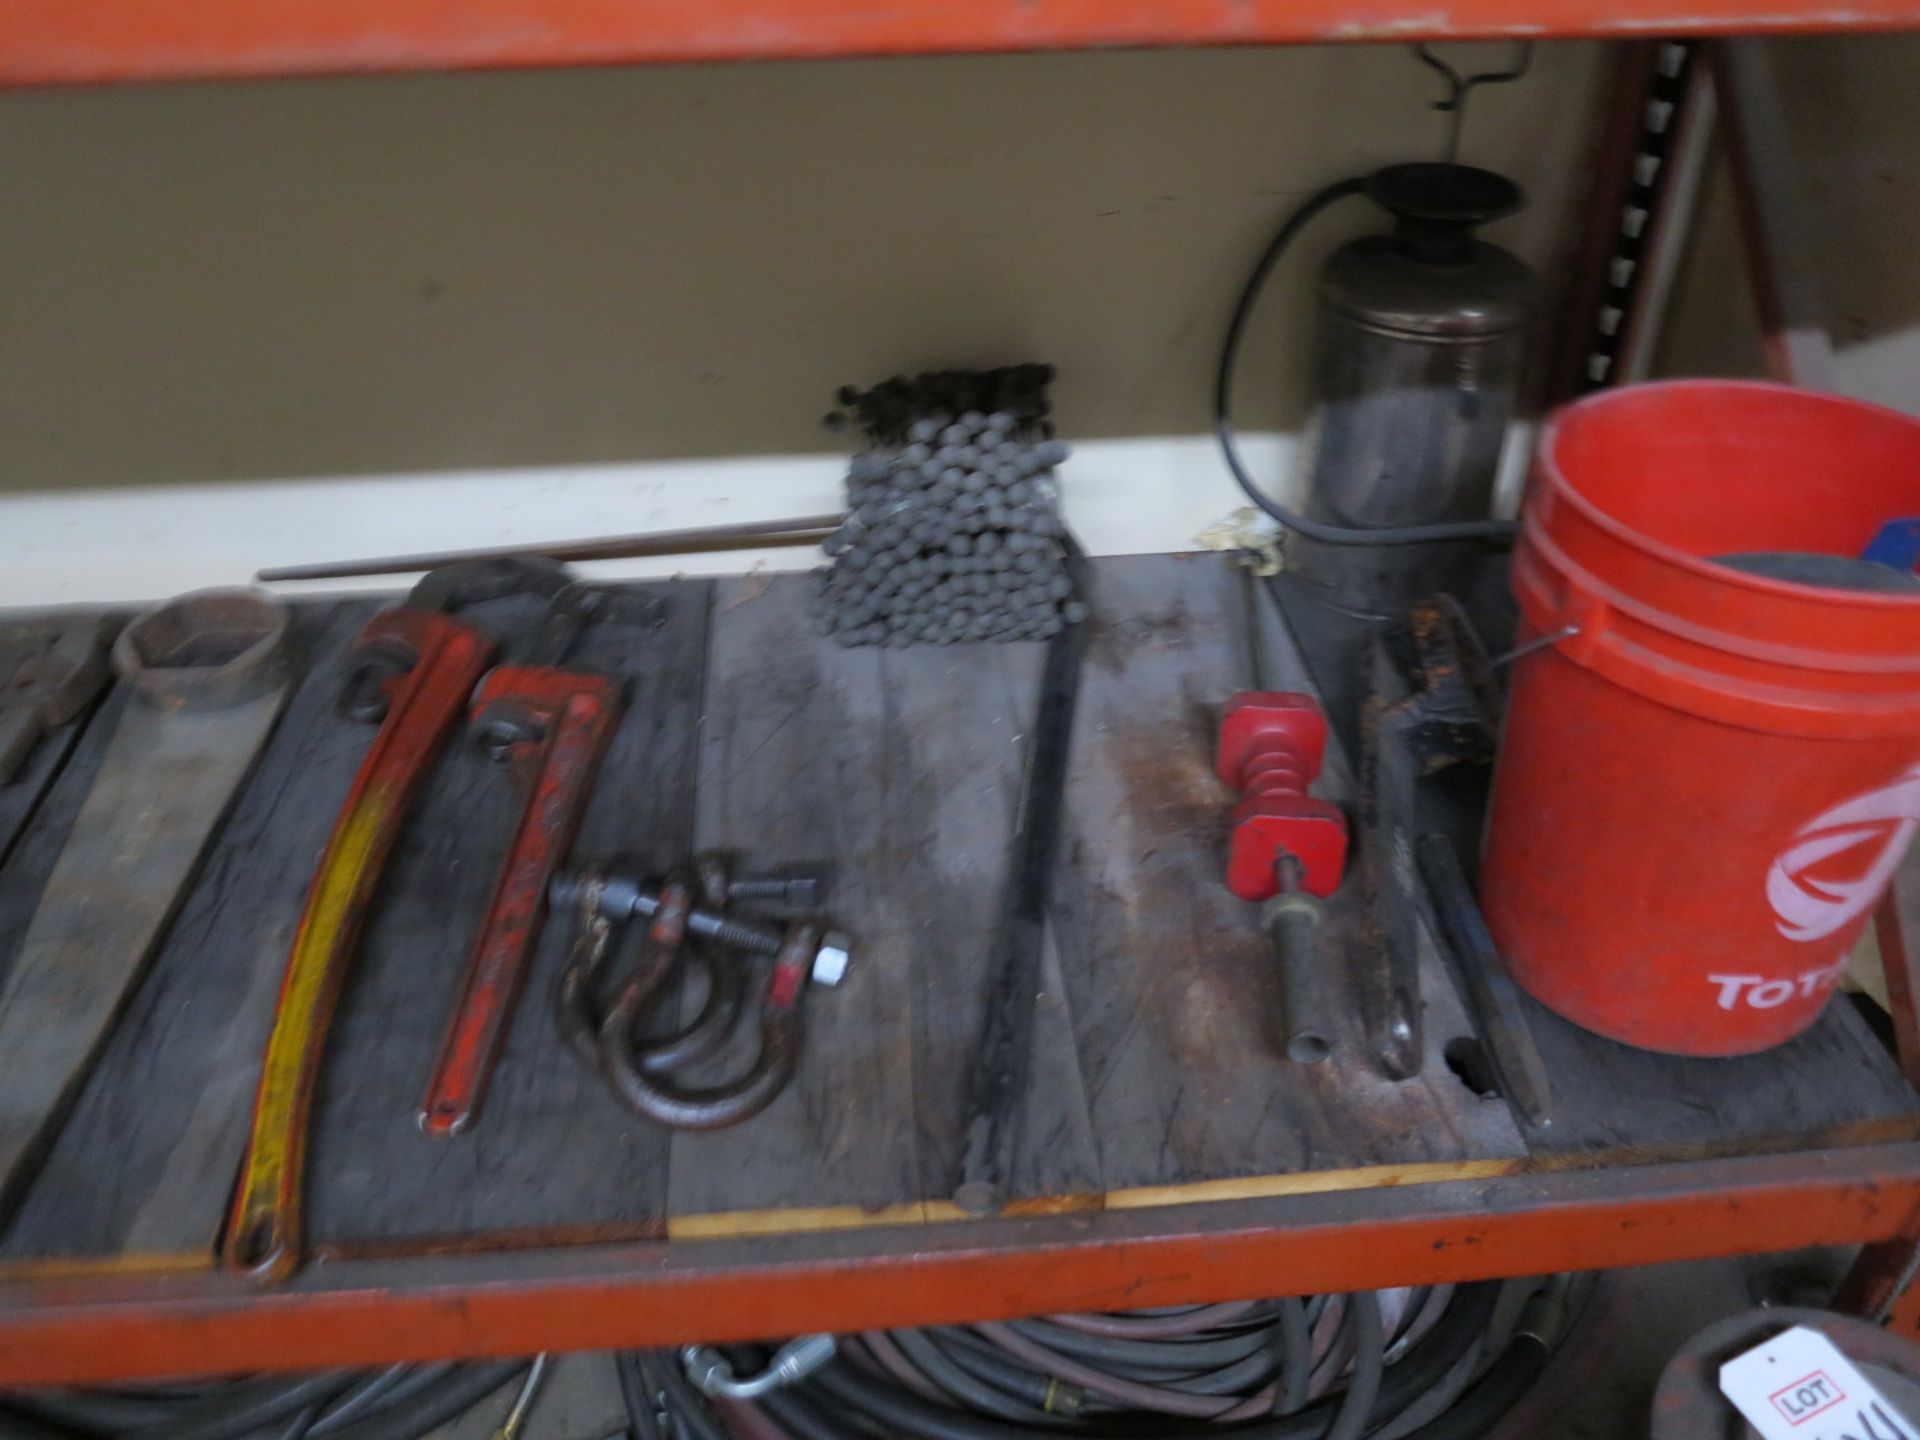 LOT - (9) PIPE WRENCHES UP TO 4', SLIDE HAMMER, ETC. - Image 3 of 3